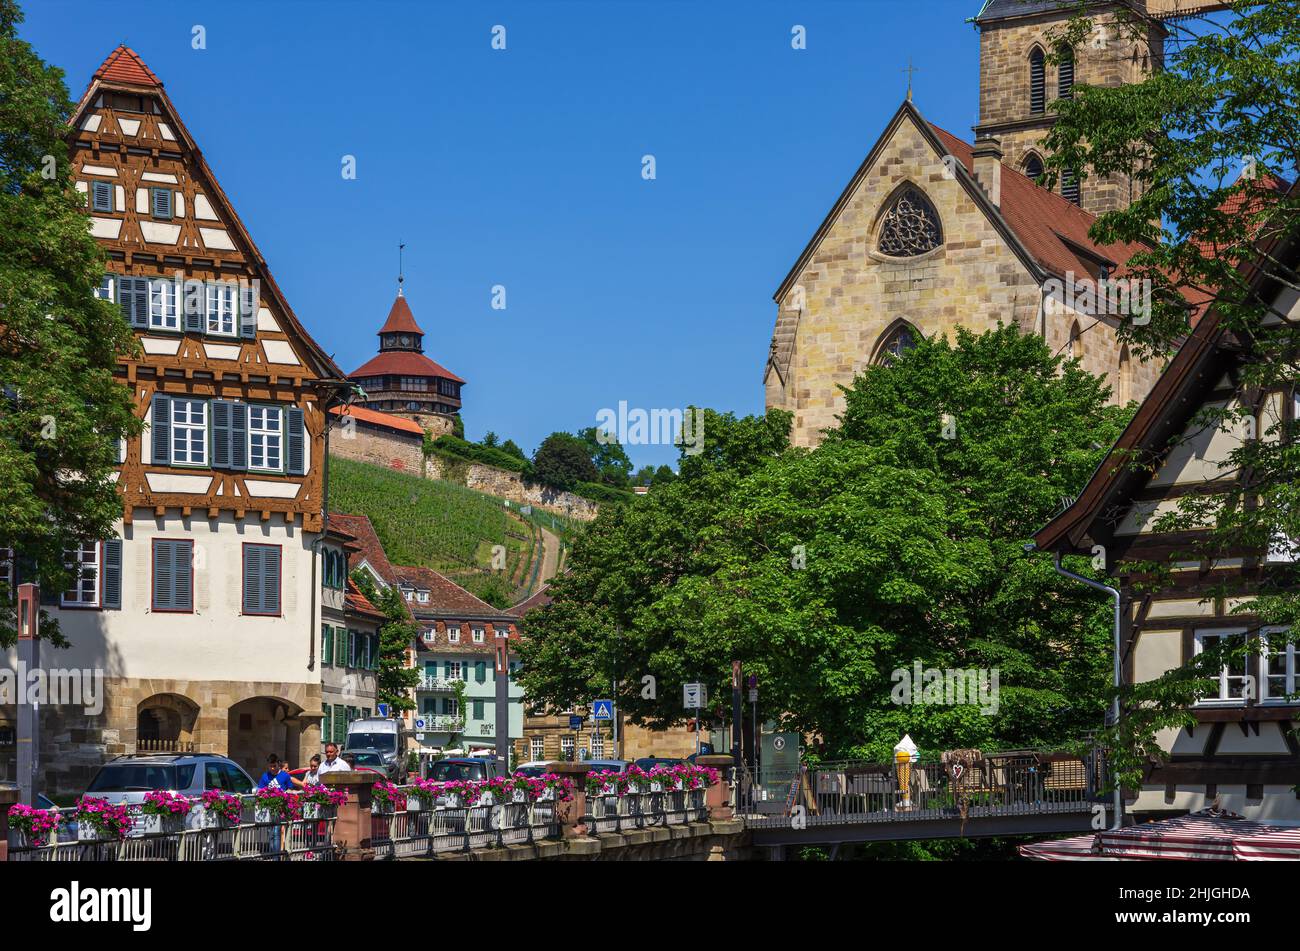 Esslingen am Neckar, Baden-Württemberg, Germany: View from the Agnes Bridge over the Roßneckar Canal to the town church of St. Dionys. Stock Photo